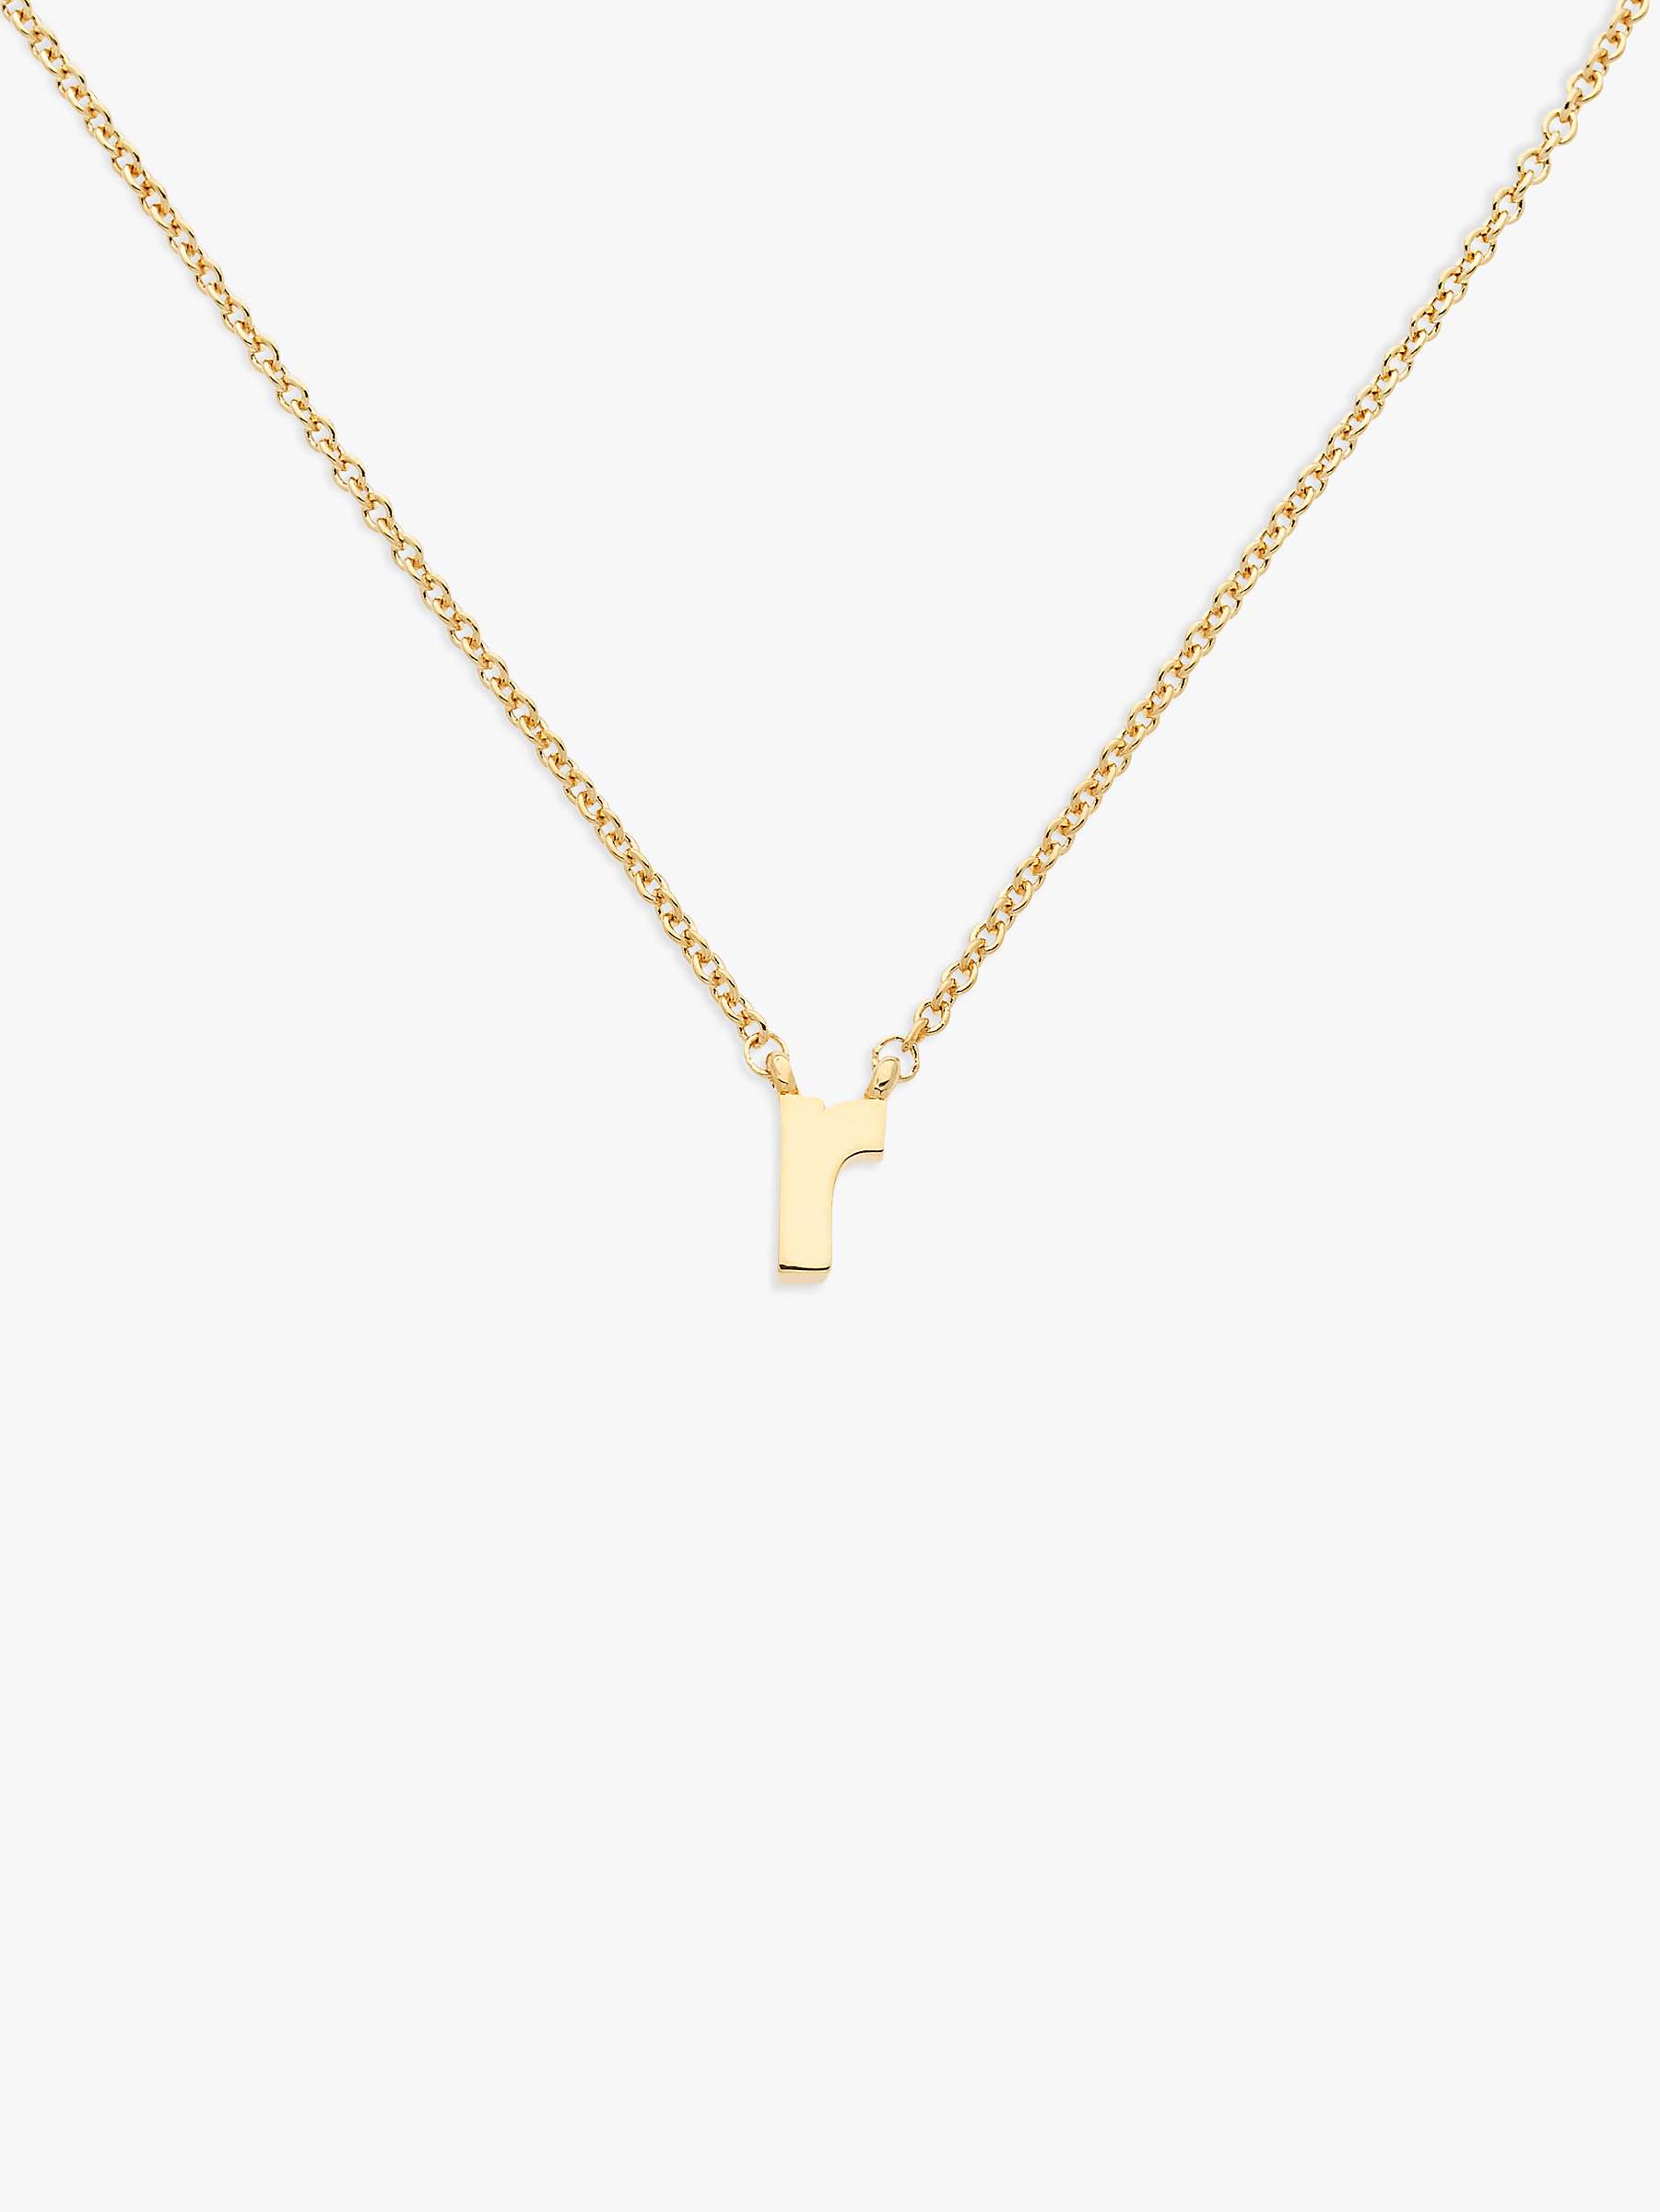 Buy Melissa Odabash Gold Plated Initial Pendant Necklace Online at johnlewis.com